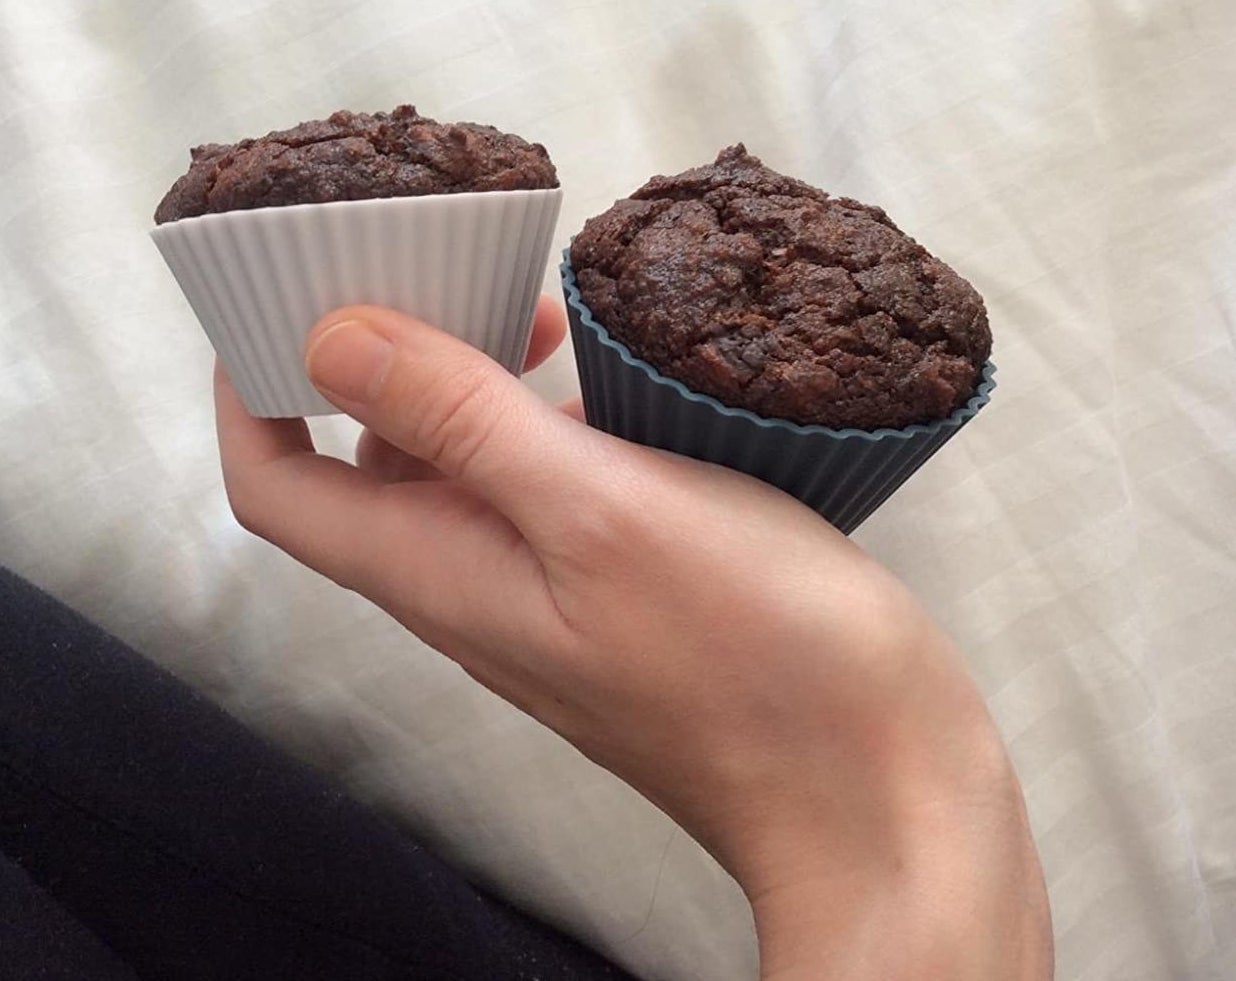 A reviewer photo of a hand holding two chocolate cupcakes that are in the silicone baking cups 